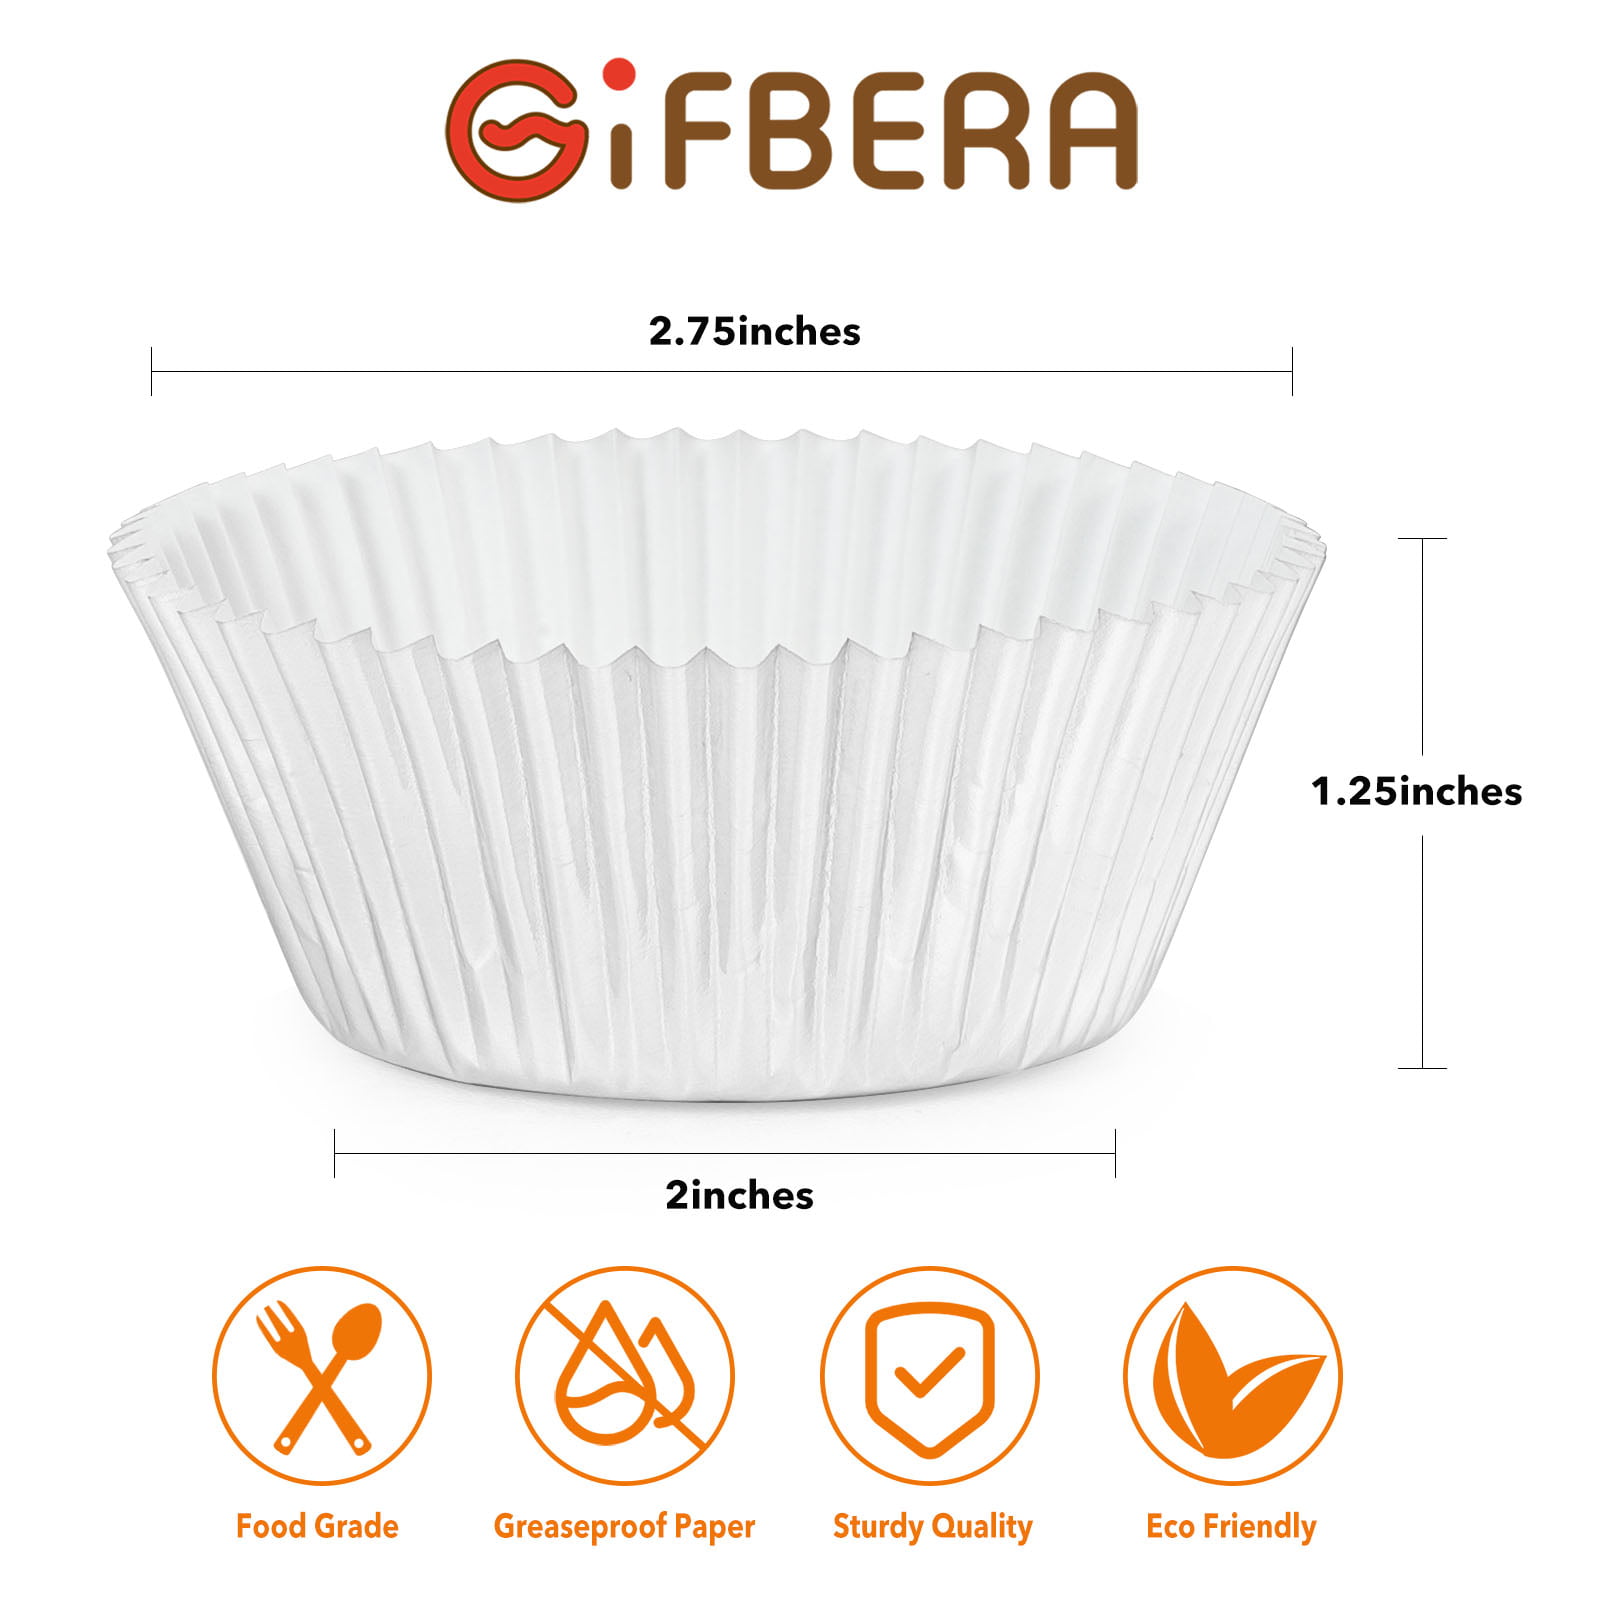 Gifbera Jumbo White Cupcake Liners Greaseproof Paper for Baking 100 Counts  - Large Muffin Liners Baking Cups Cupcake Wrappers for Wedding Birthday